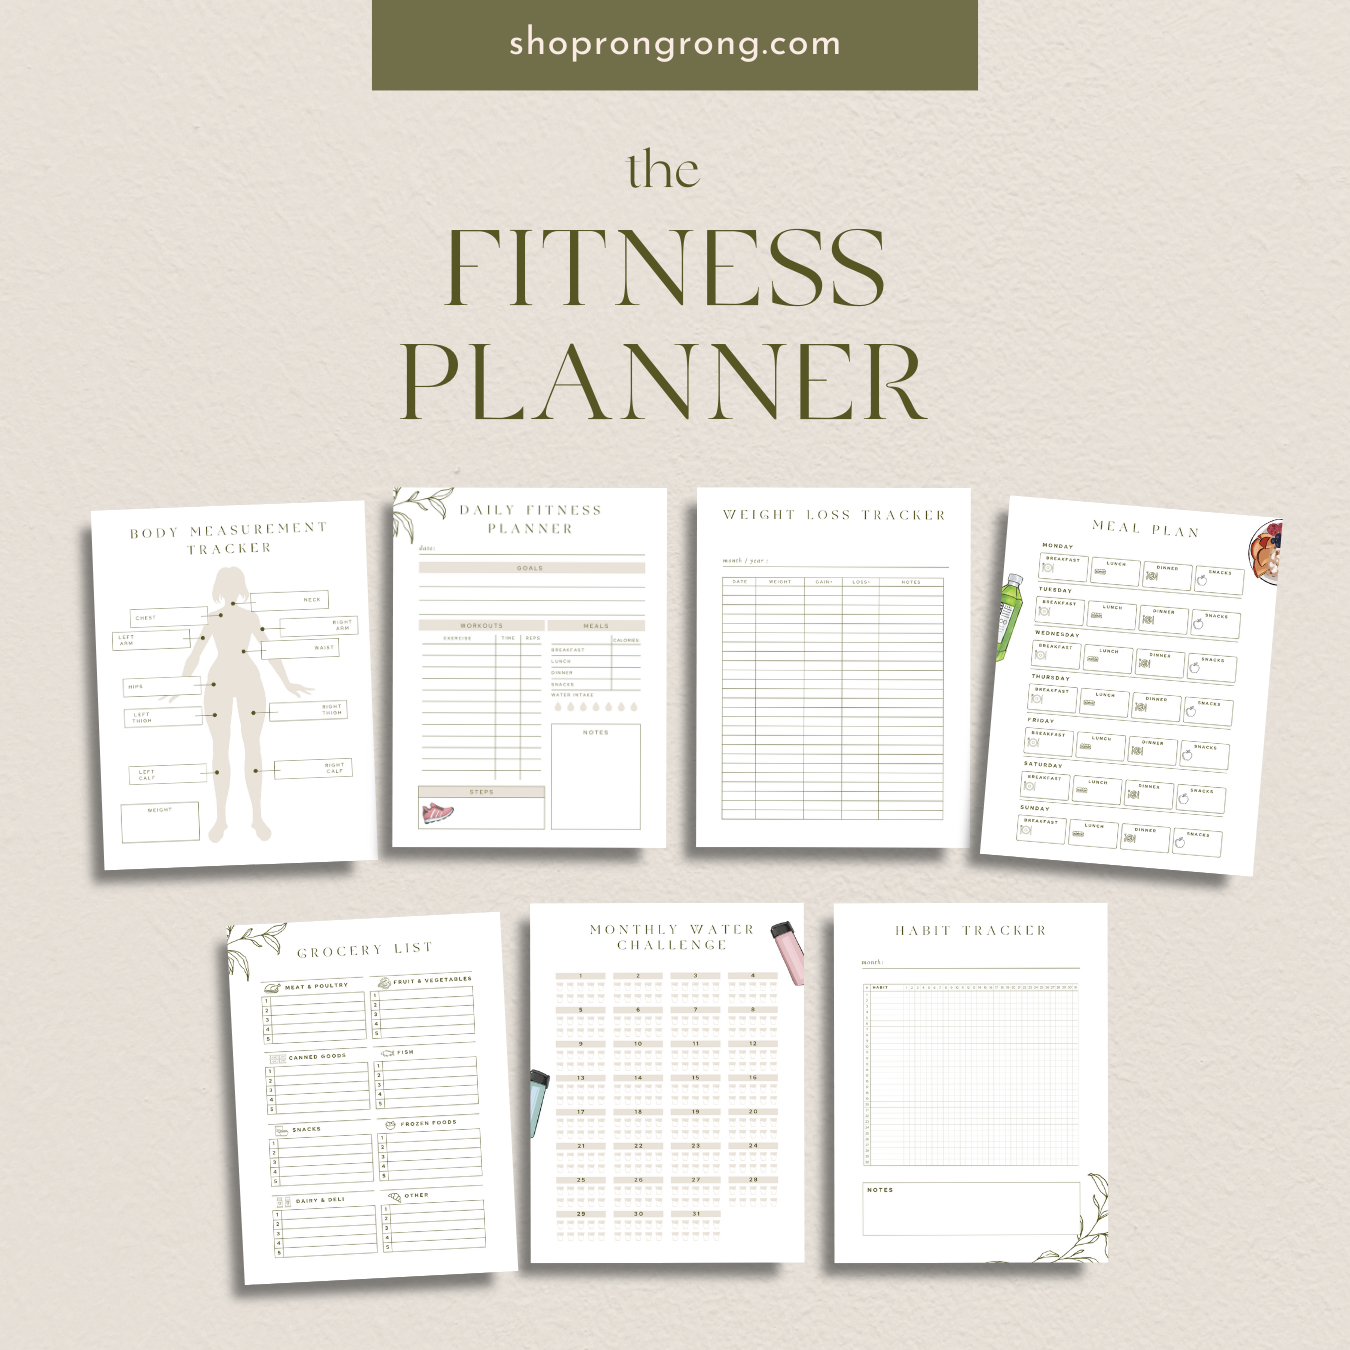 Shop Rongrong Fitness Planner for iPad